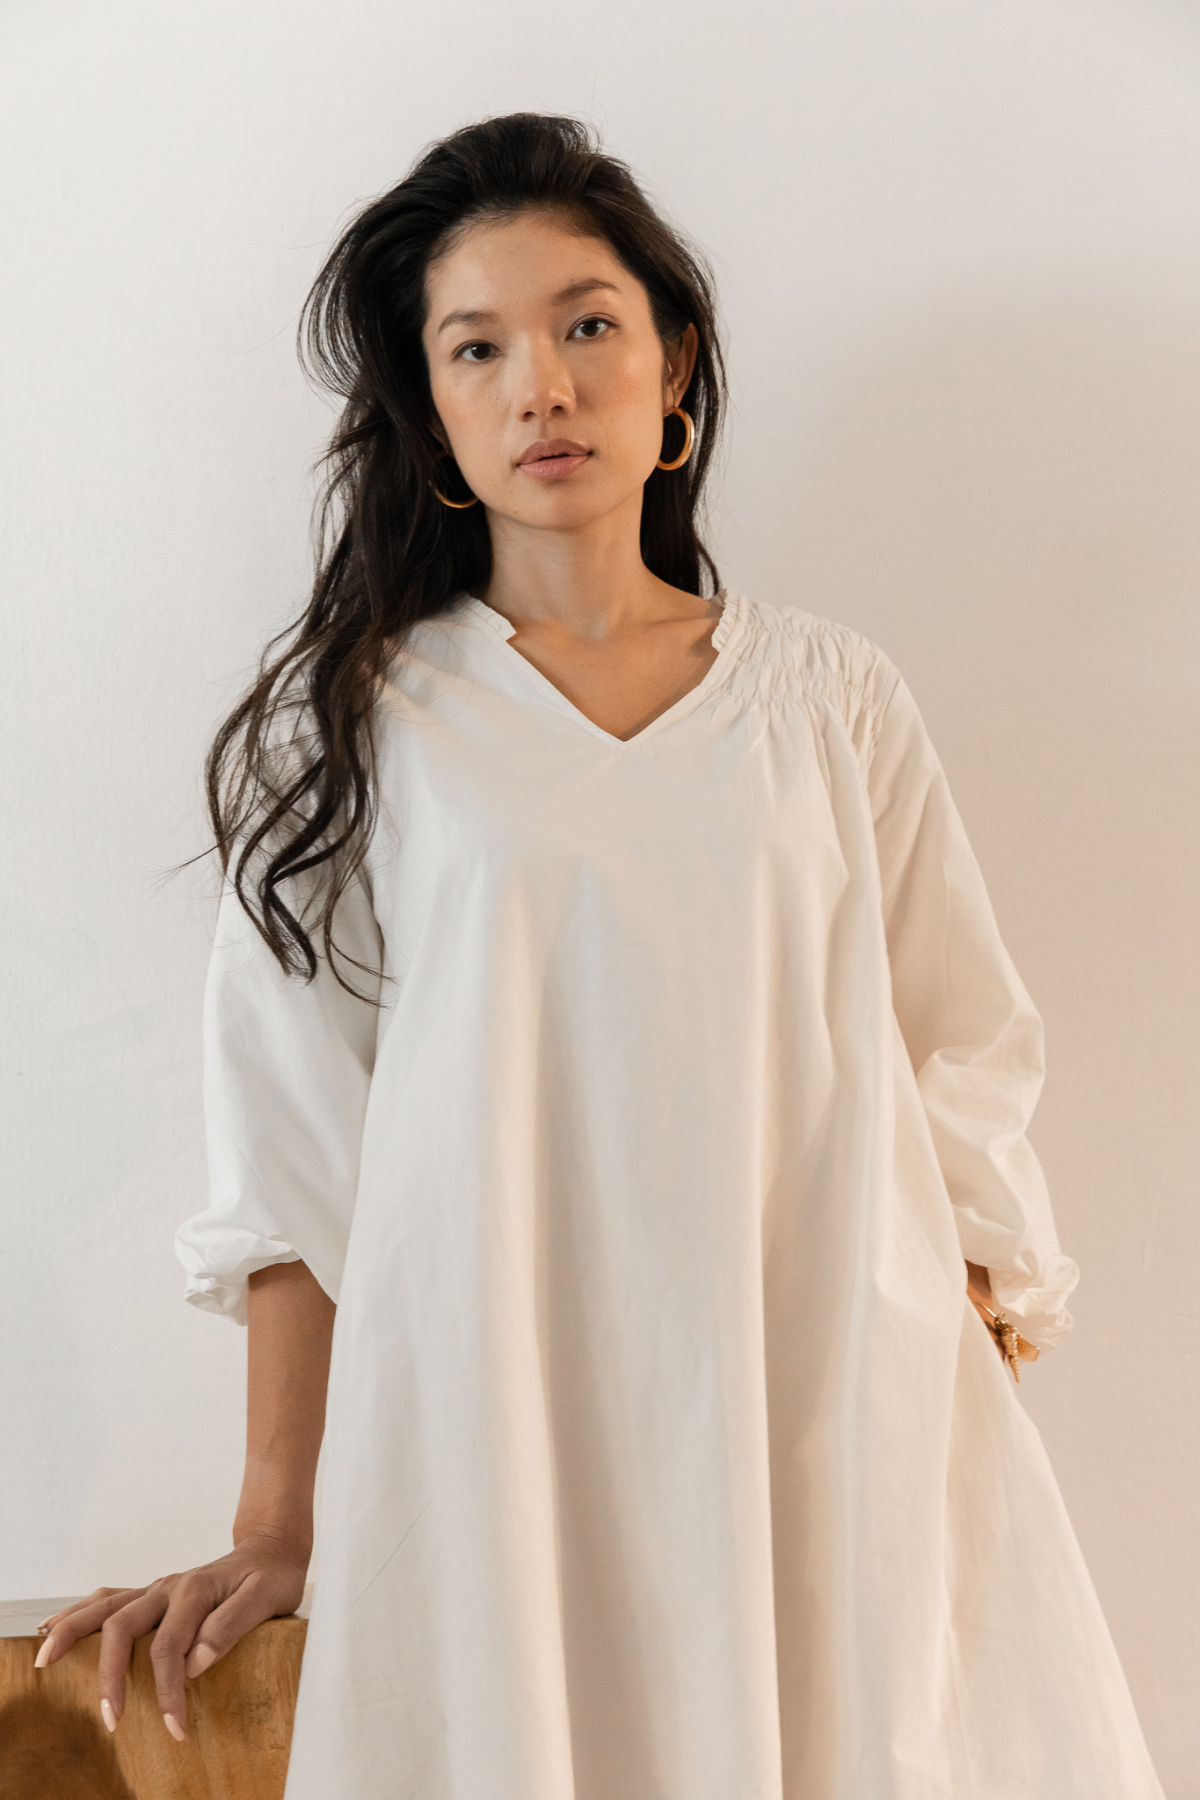 Su By Hand Chloe Dress in Cream, available on ZERRIN with free Singapore shipping